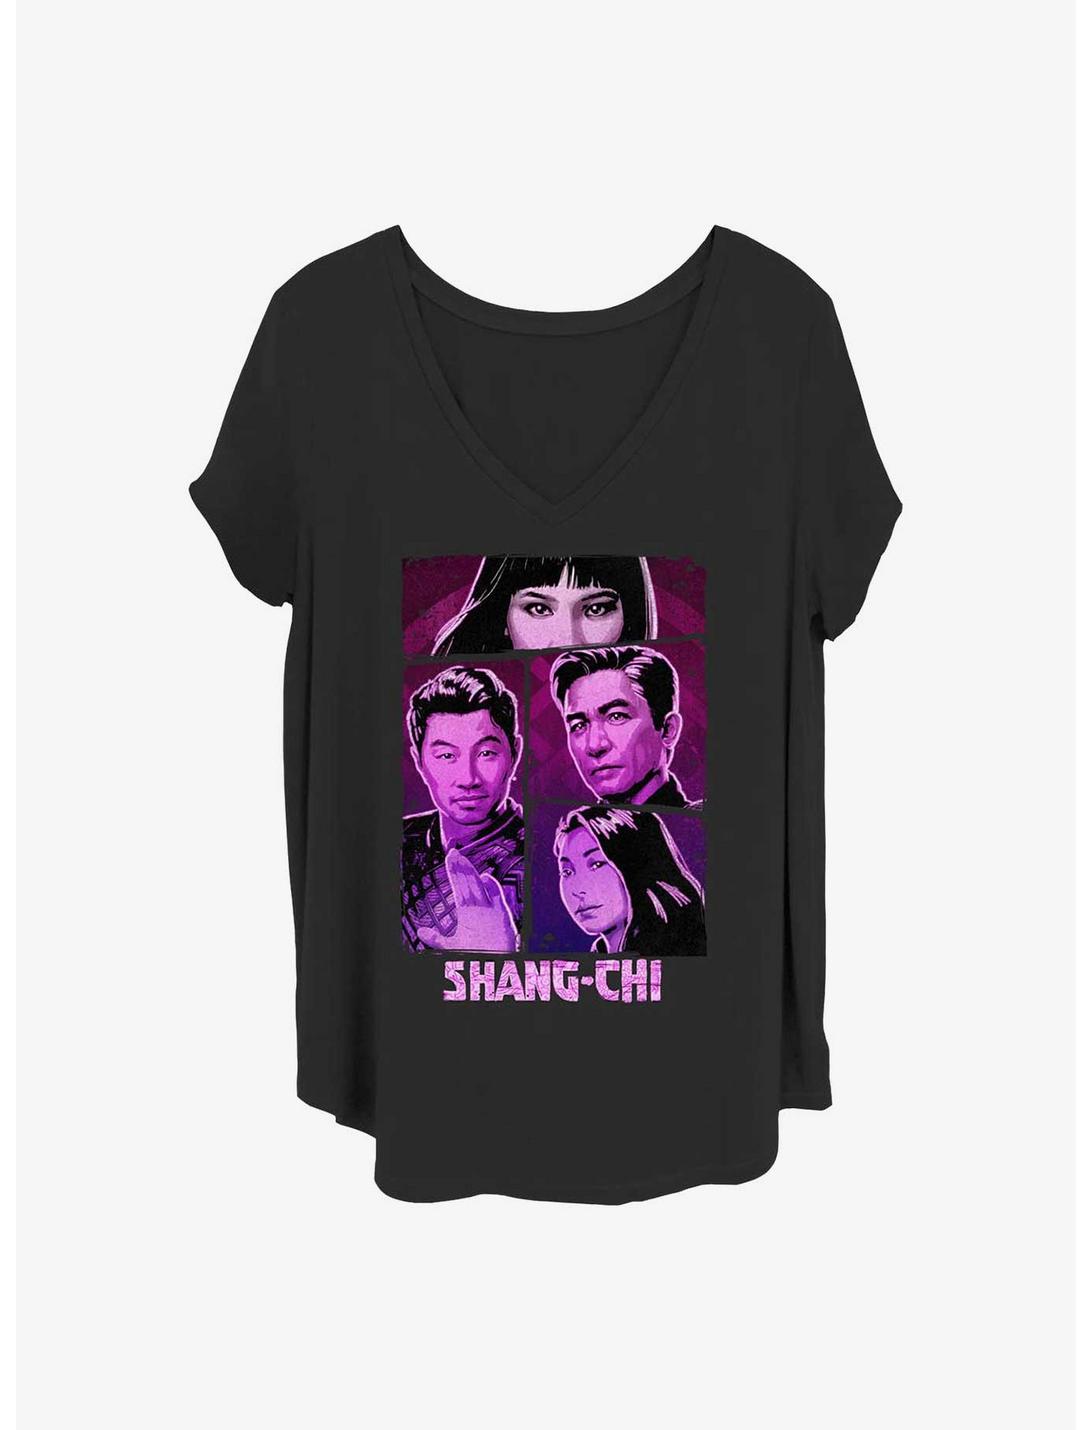 Marvel Shang-Chi and the Legend of the Ten Rings Neon Panel Girls T-Shirt Plus Size, BLACK, hi-res